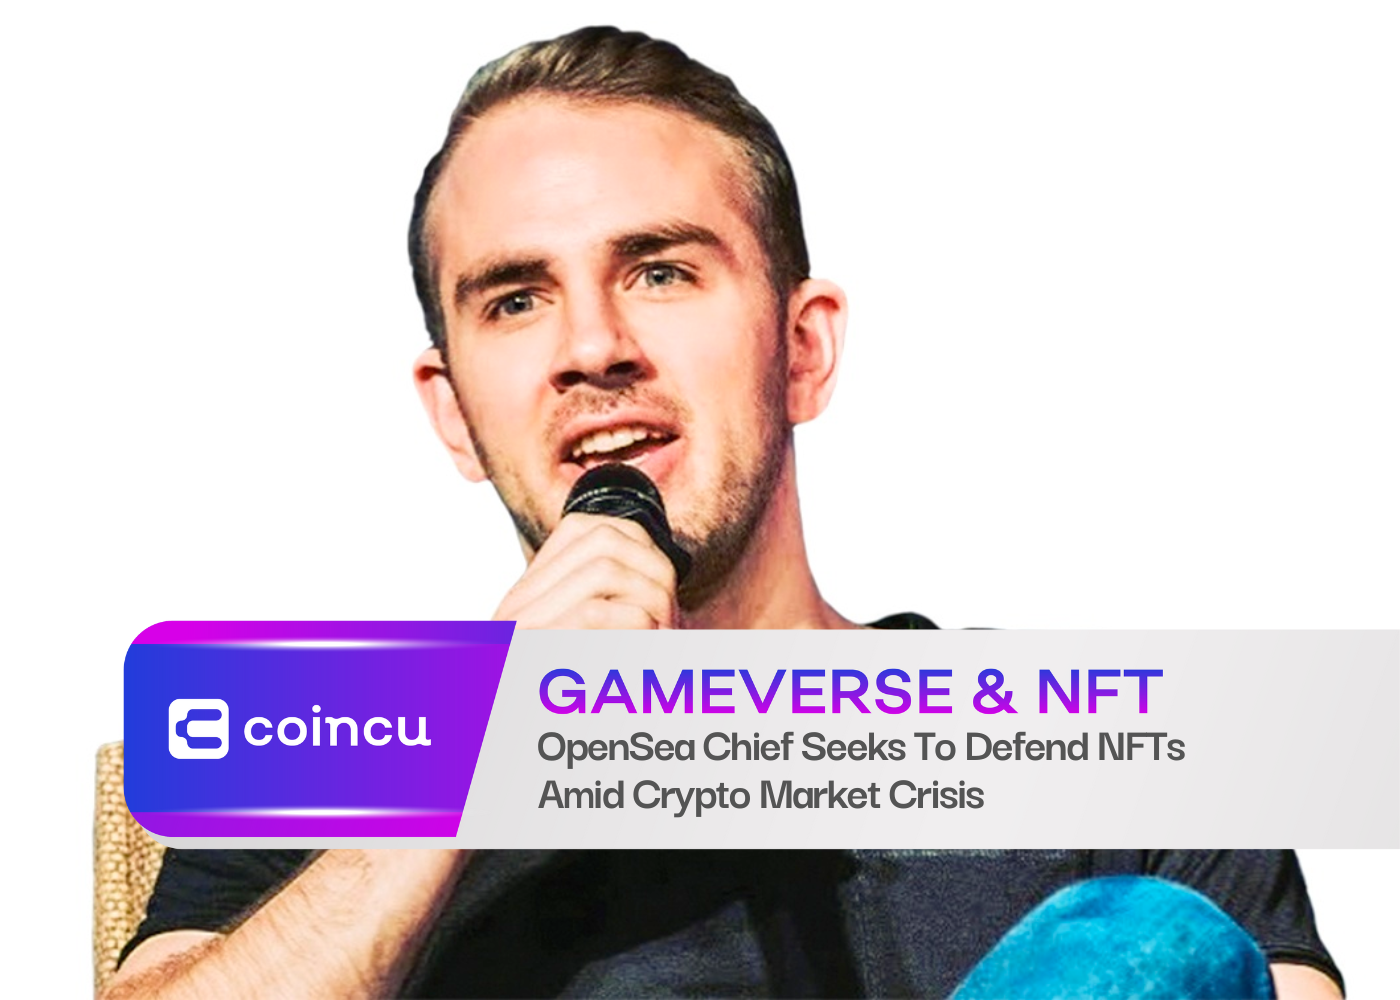 OpenSea Chief Seeks To Defend NFTs Amid Crypto Market Crisis